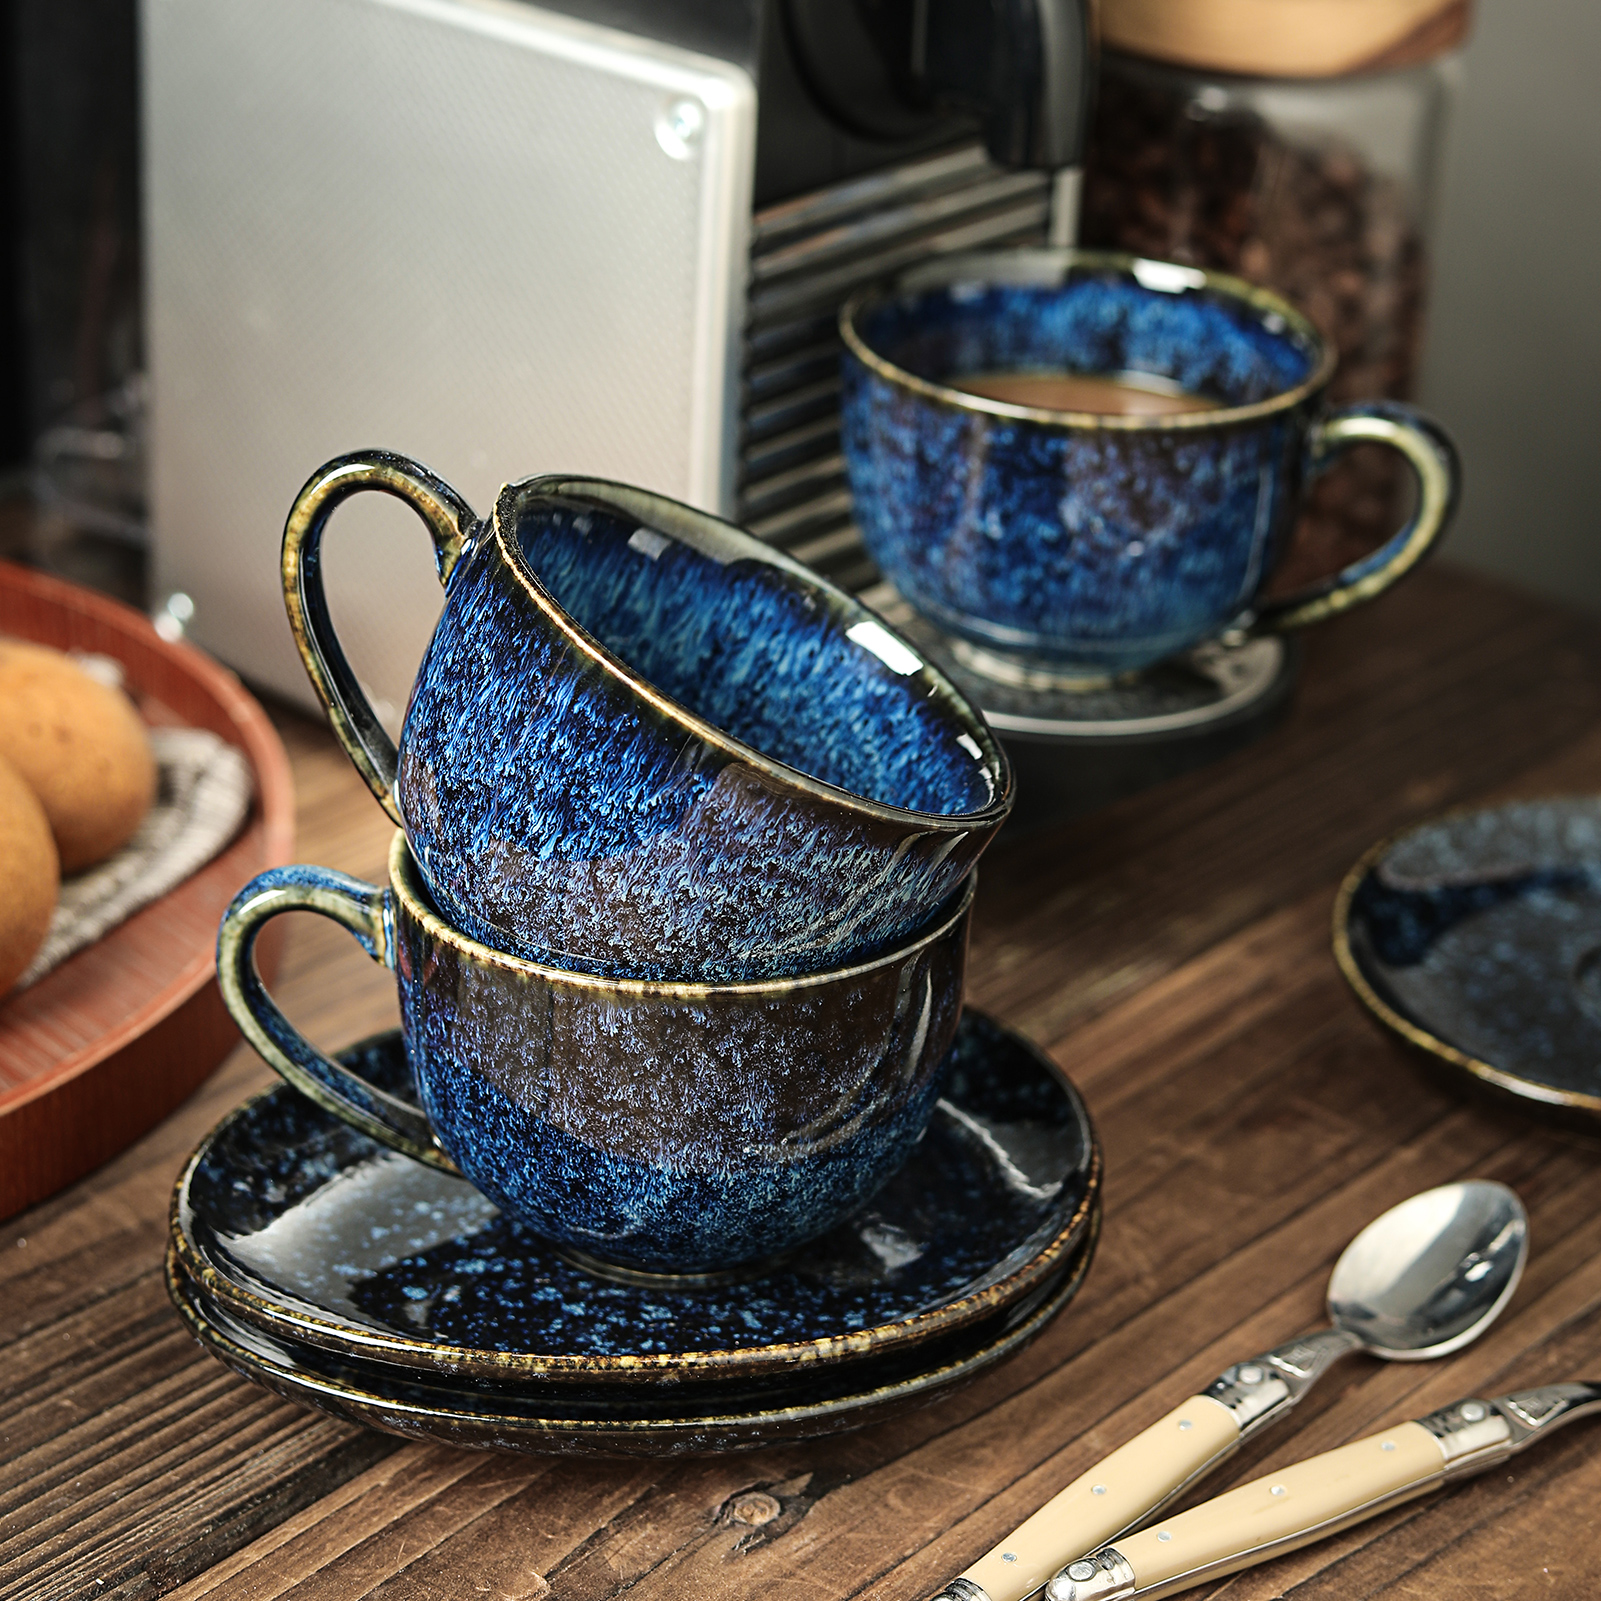 Vicrays 6.5 oz Cappuccino Cups with Saucers, Set of 4, Ceramic Coffee Cup  for Au Lait, Double shot, Latte, Cafe Mocha, Tea (Starry Blue) 